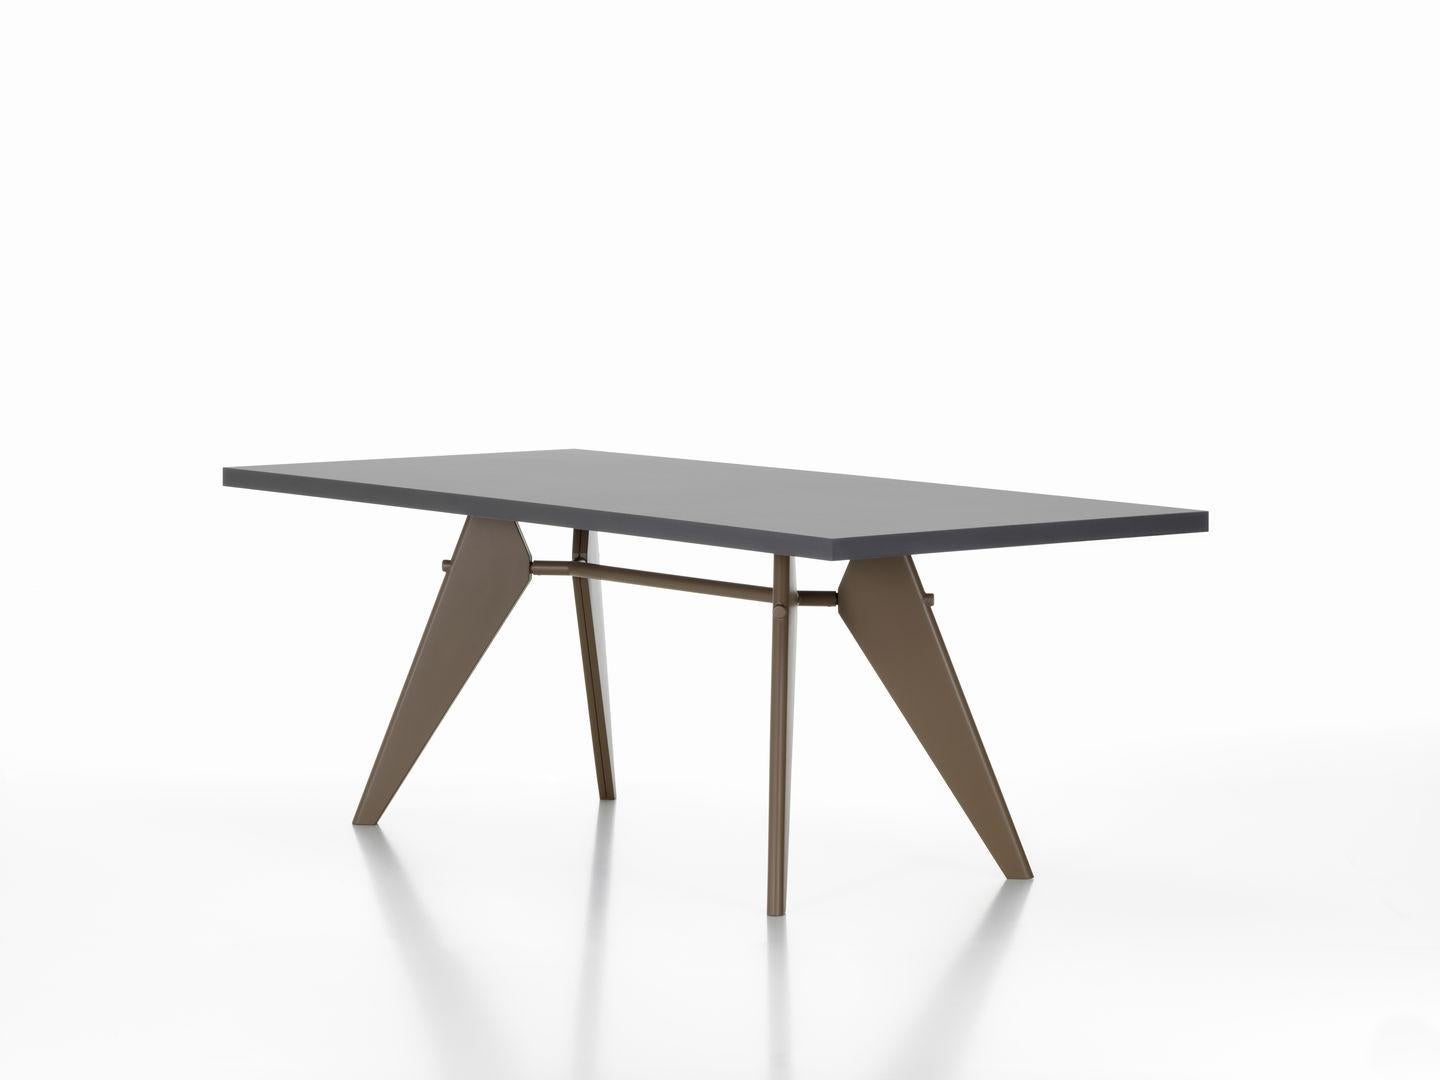 Table designed by Jean Prouvé in 1950.
Manufactured by Vitra, Switzerland.

The aesthetic appearance of Jean Prouvé's EM Table adheres to structural principles, illustrating the flow of forces and stresses in its construction. The designer and